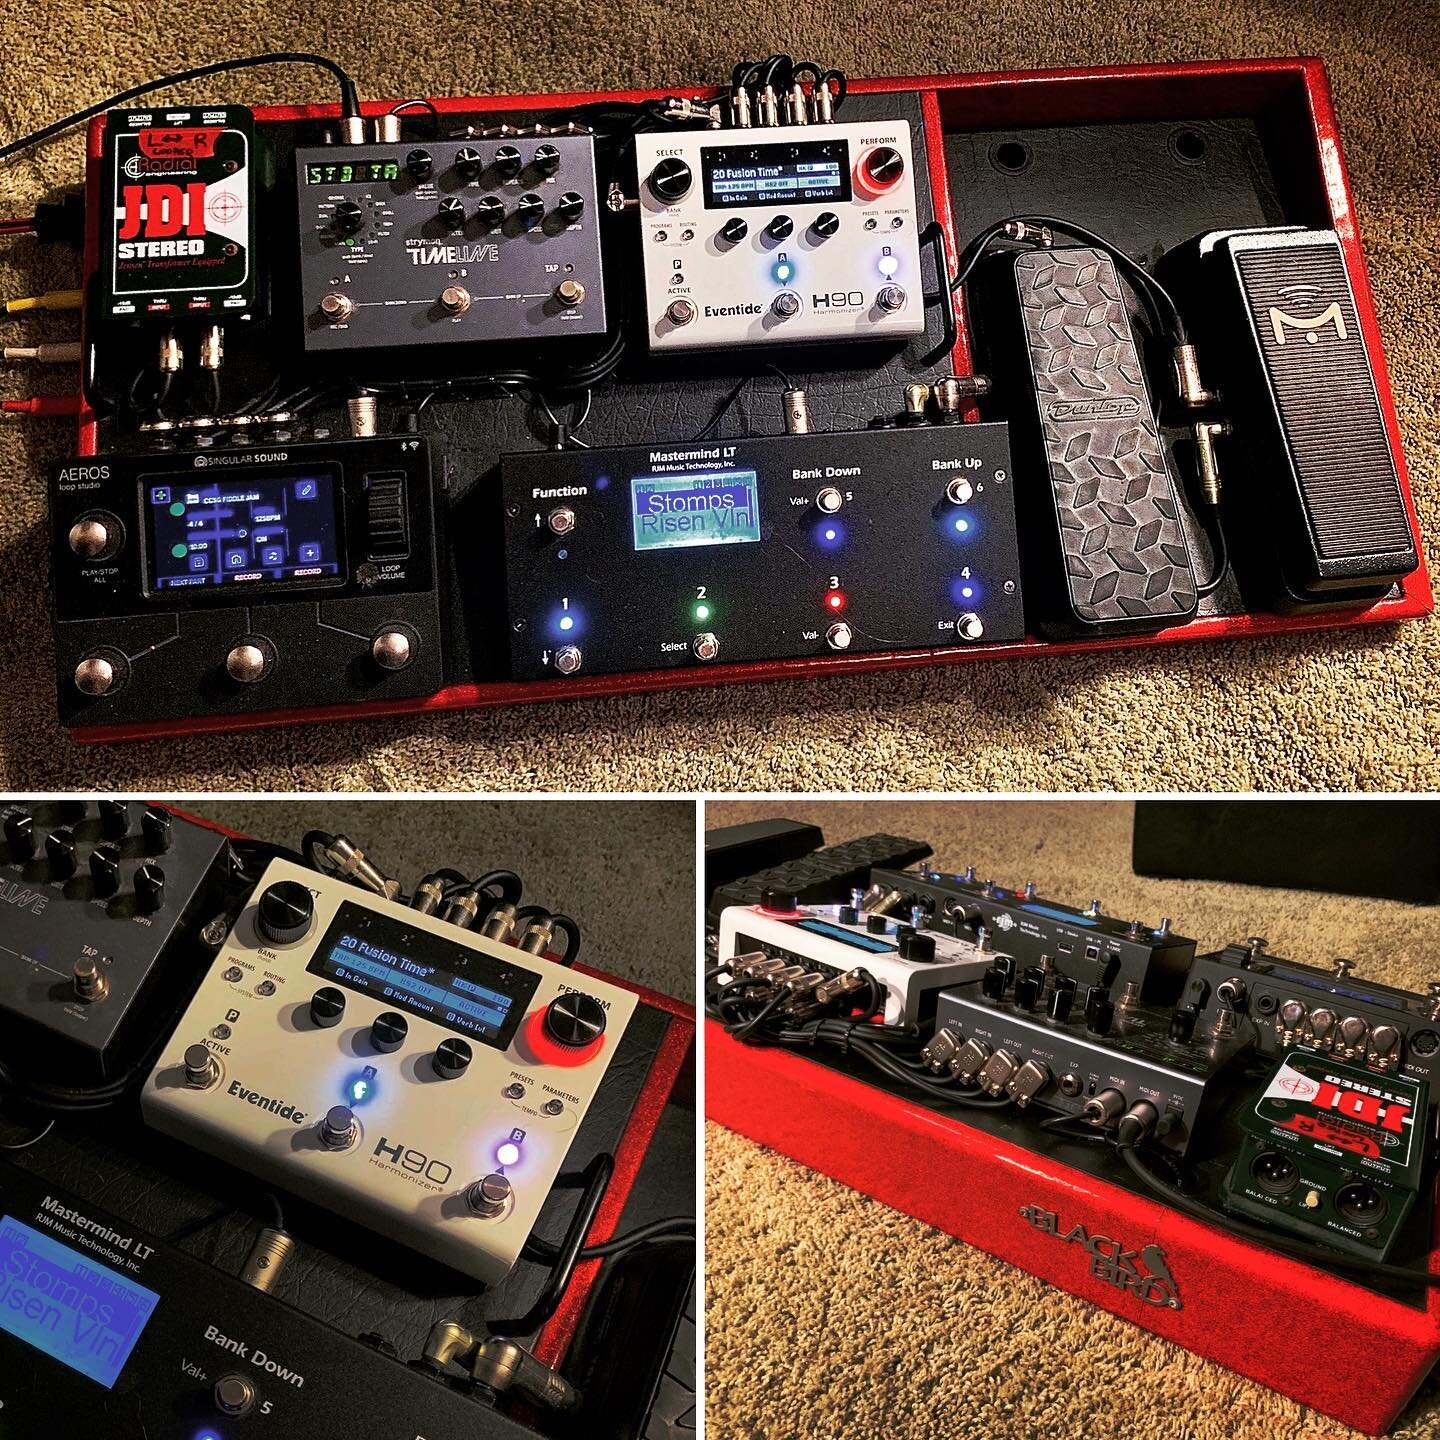 The brain trust at @xacttone have yet again outdone themselves!! I have been in nerd heaven this week getting acquainted with this brand new overhaul to my touring board. I&rsquo;ve had this trusty red sparkle @blackbirdboards since the first year I 